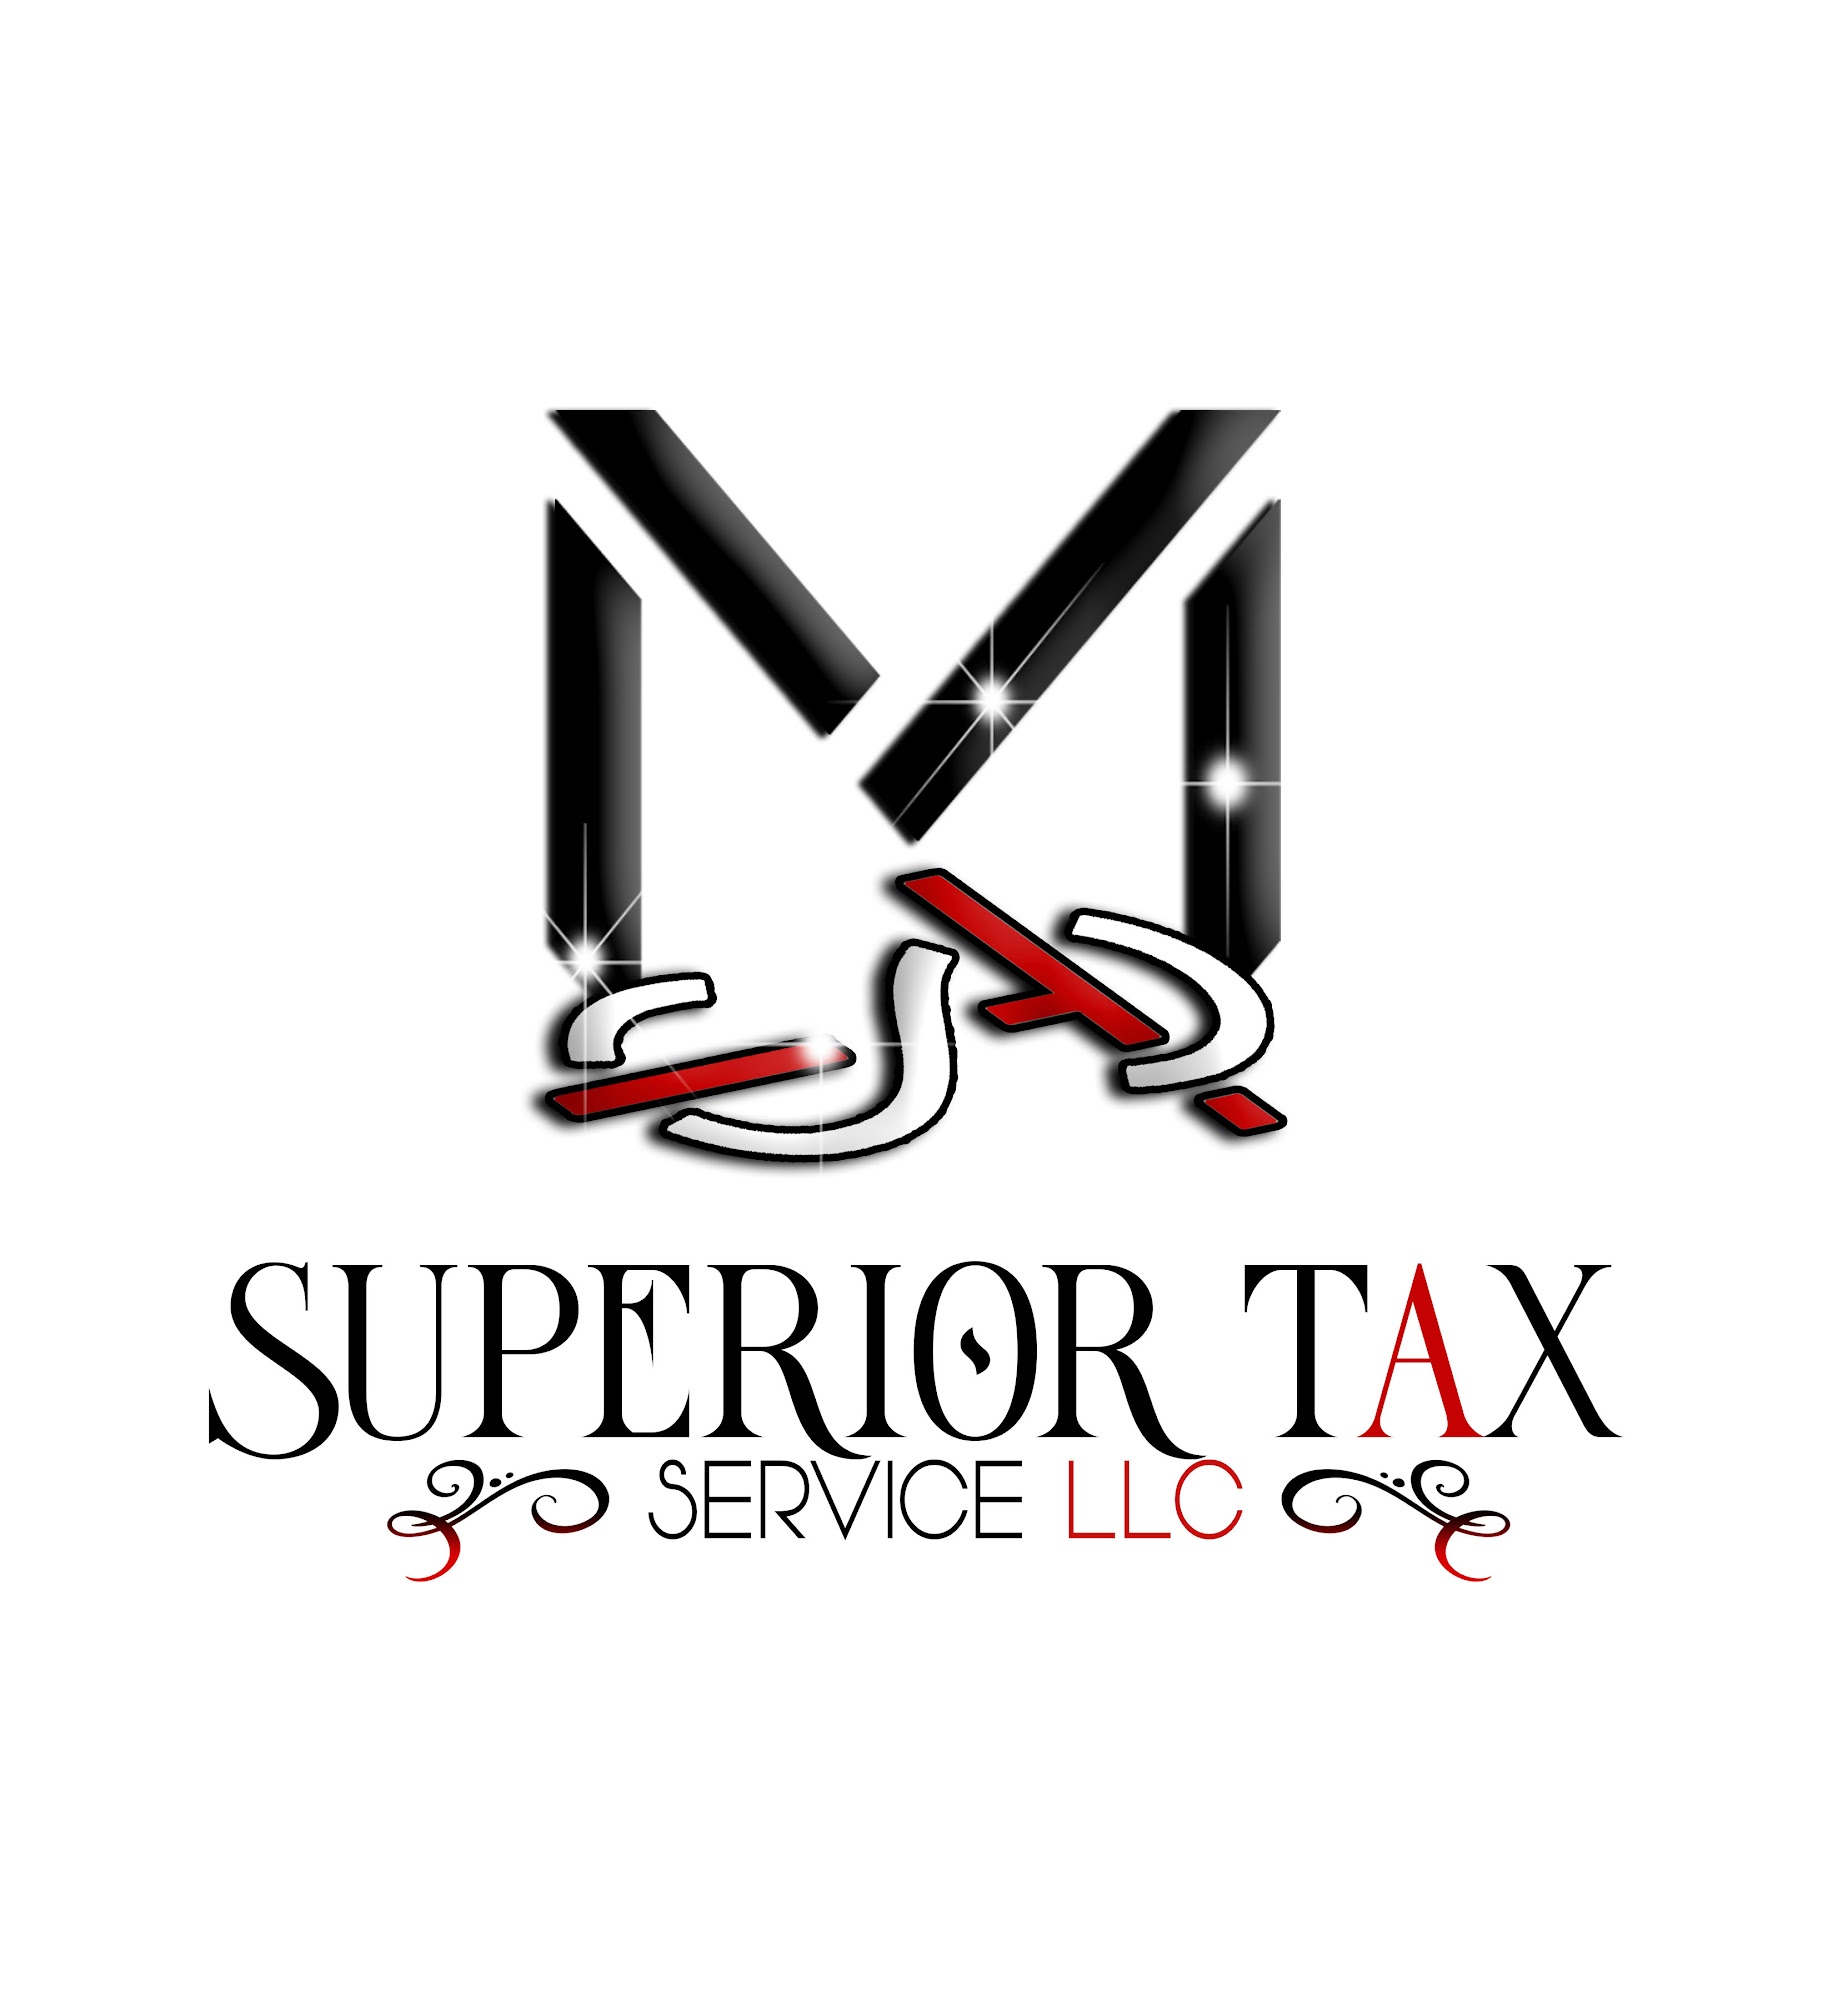 Superior Tax Services LLC 1036 W Airline Hwy, Laplace Louisiana 70068